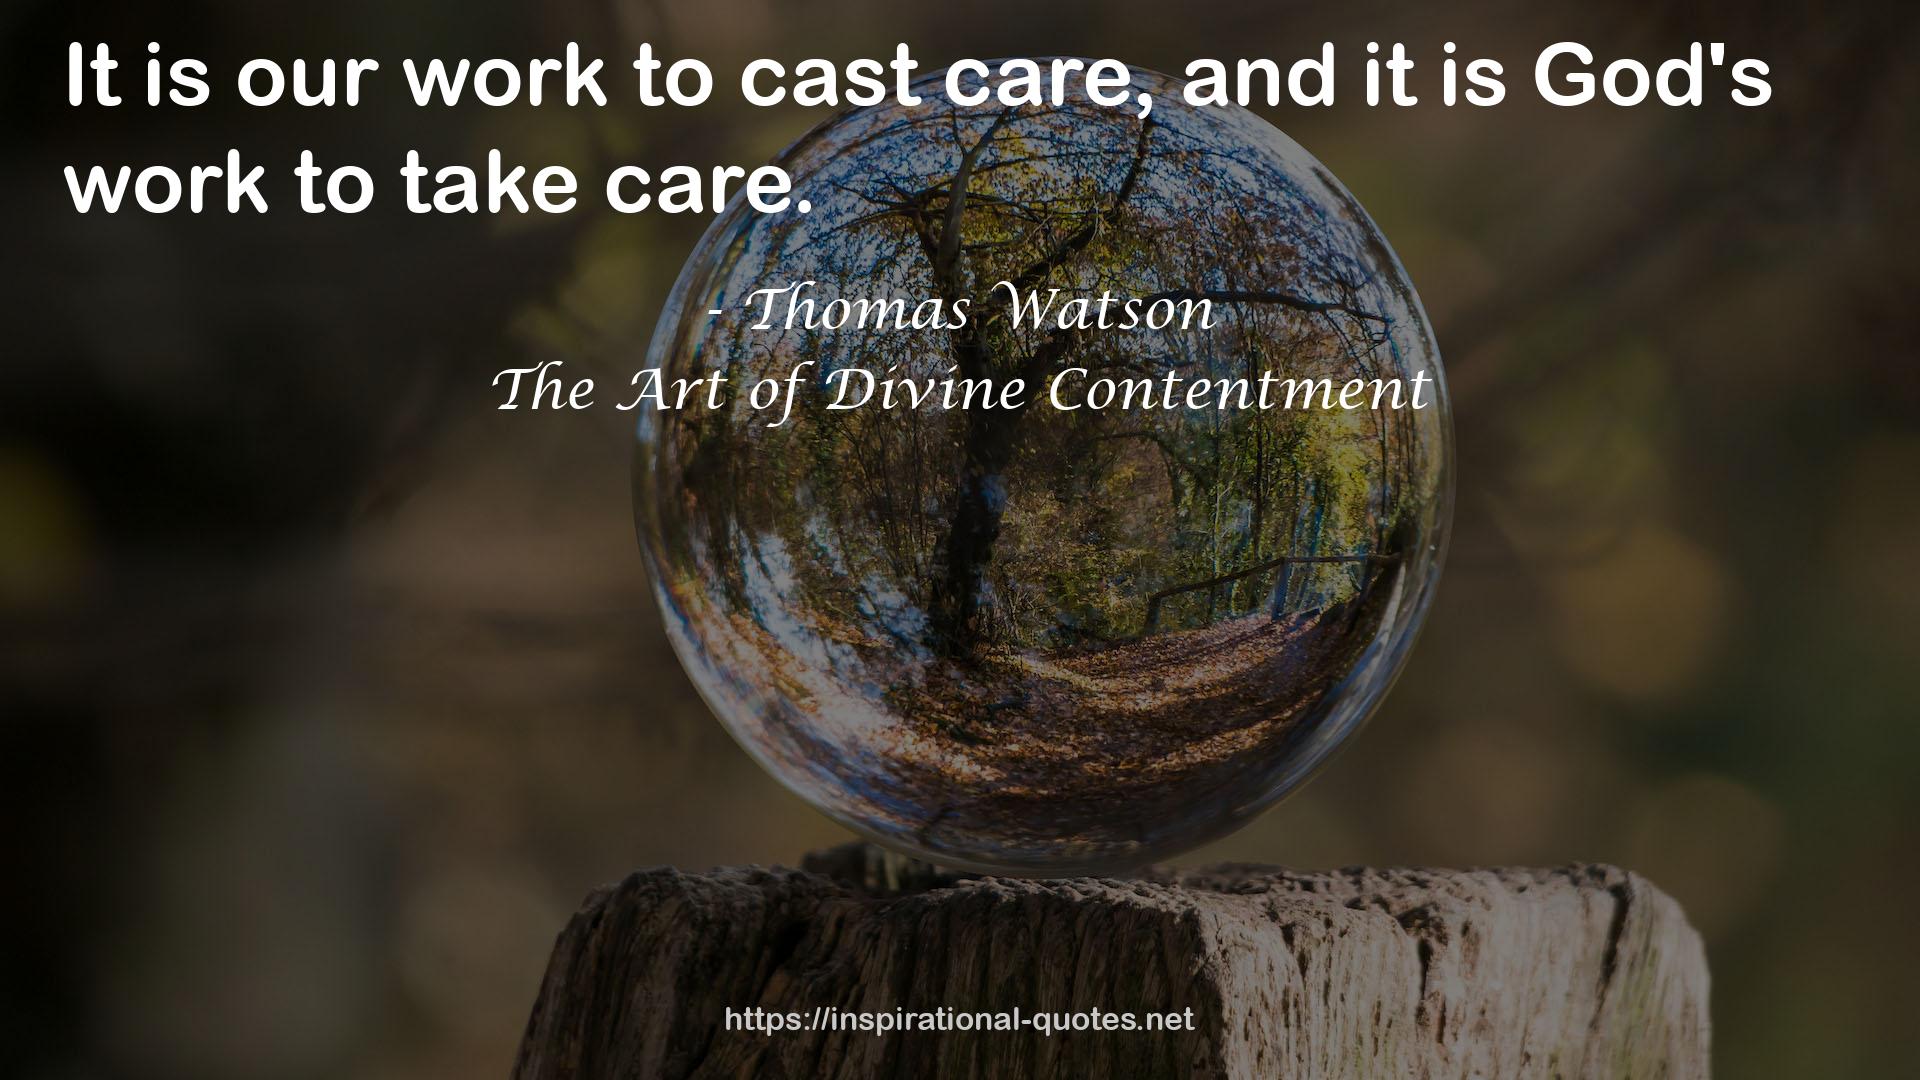 The Art of Divine Contentment QUOTES